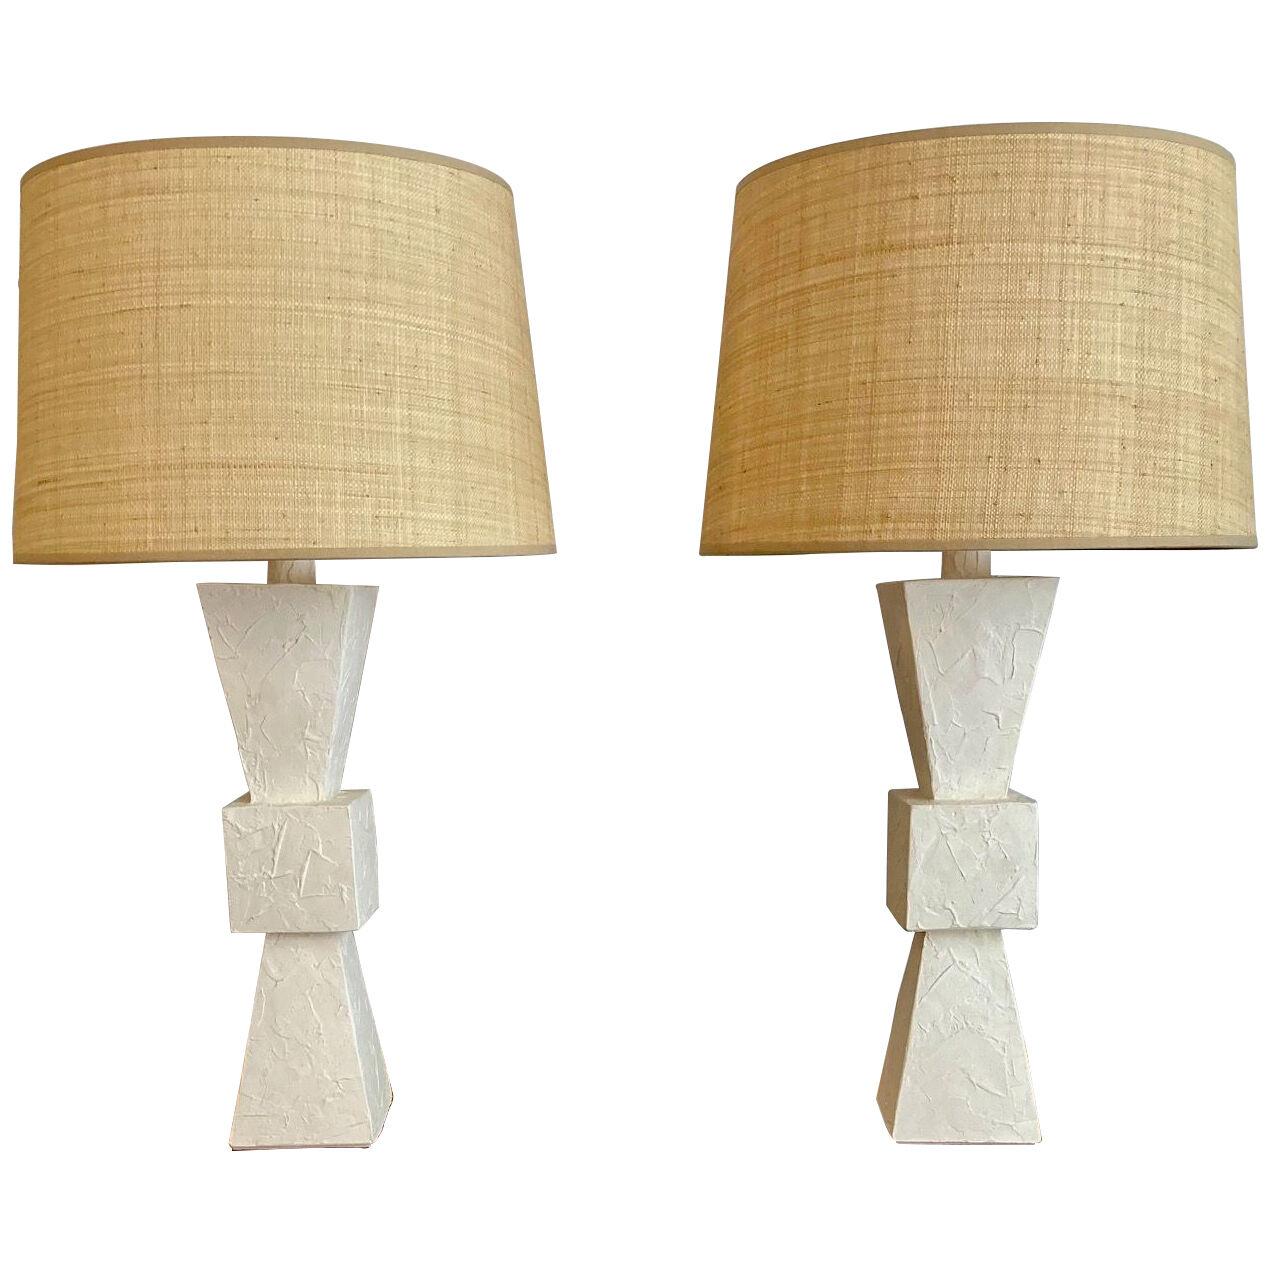 Pair of Plaster Lamps and Raffia Shades